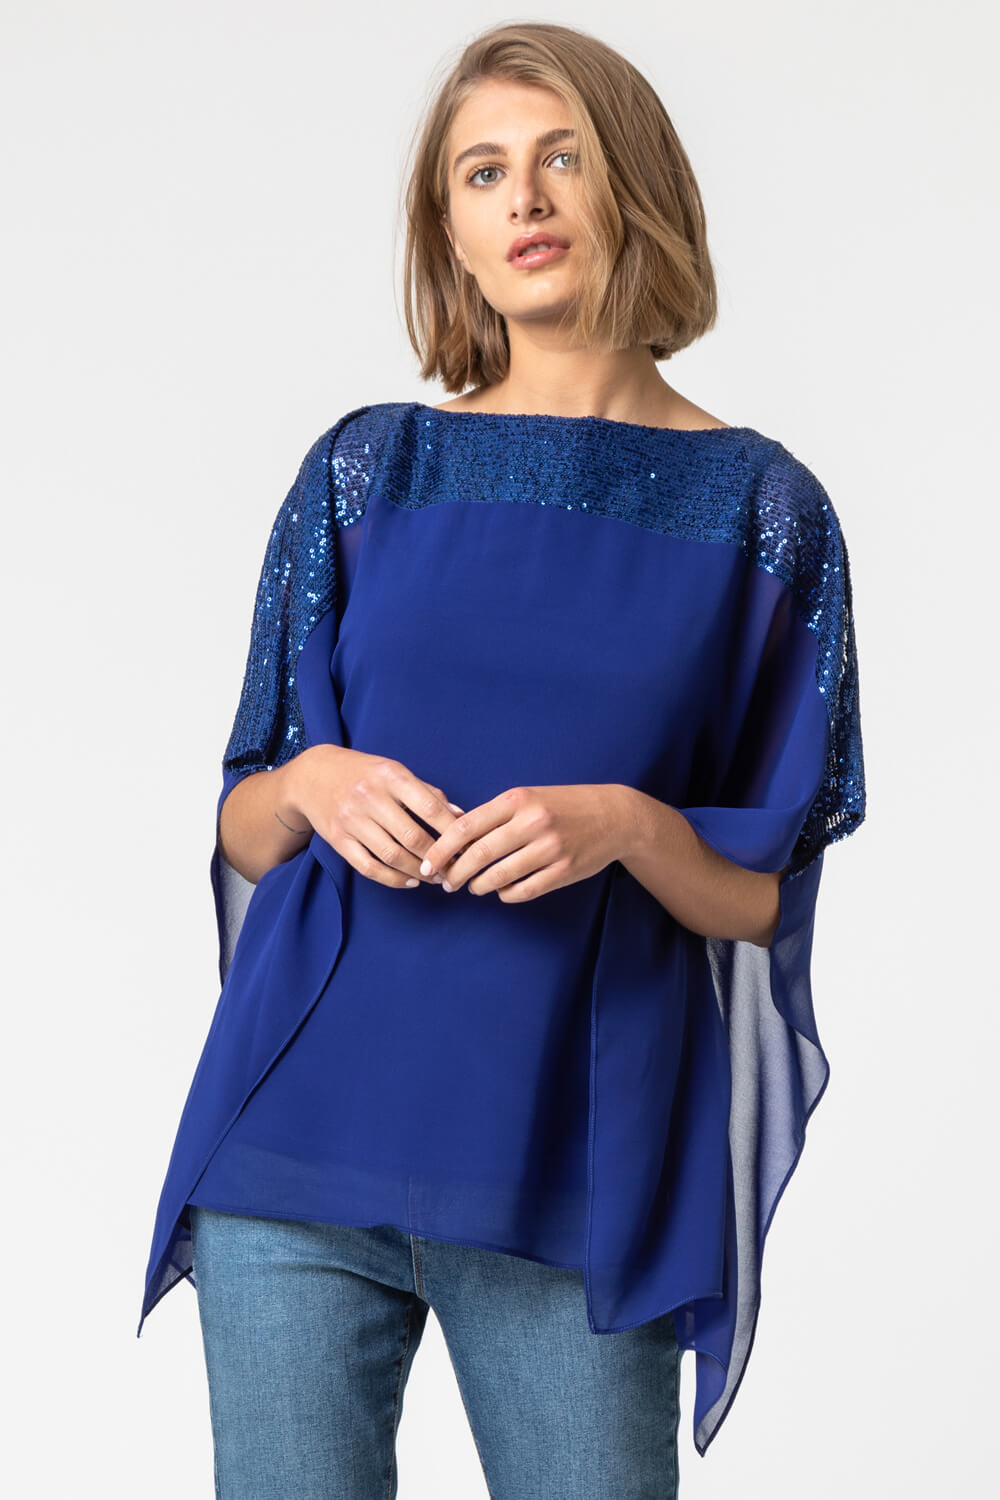 Royal Blue Sequin Embellished Chiffon Overlay Top, Image 4 of 4